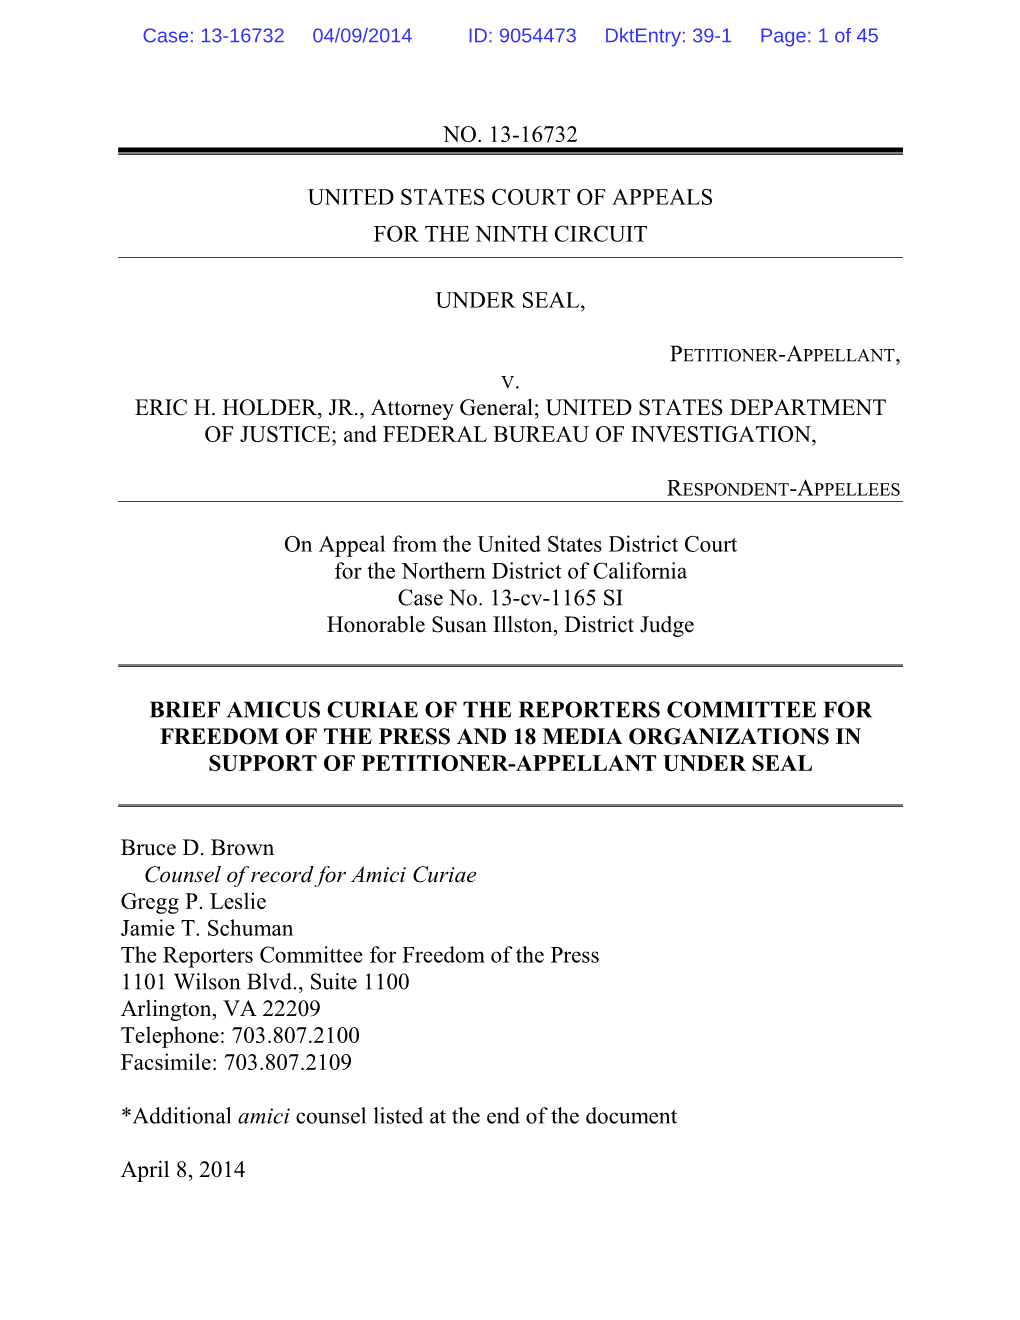 No. 13-16732 United States Court of Appeals for The